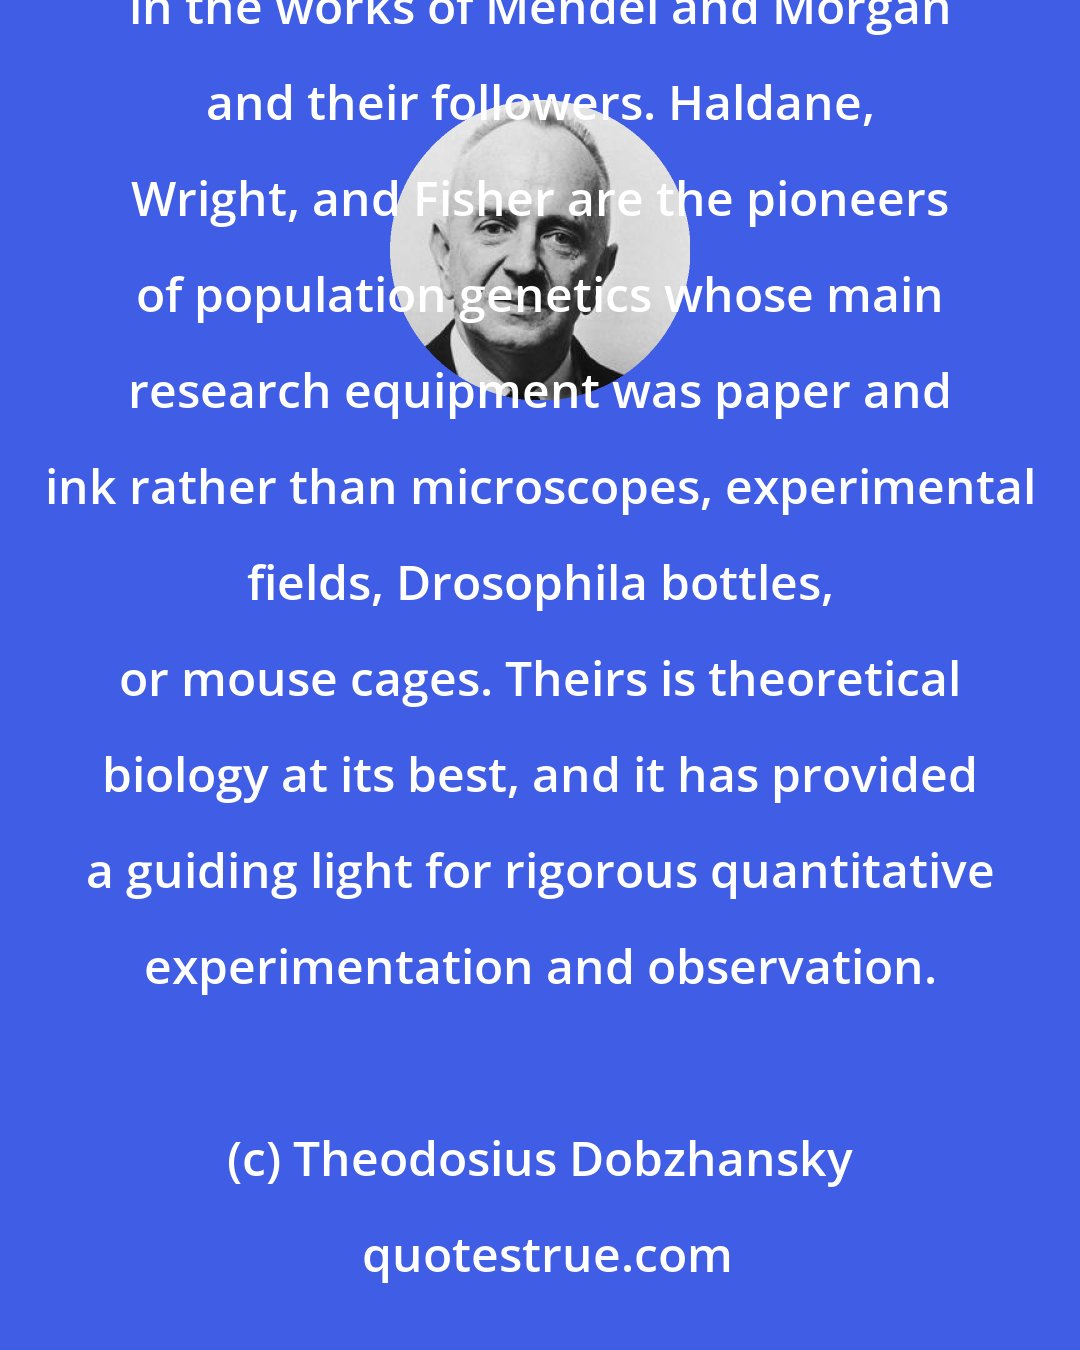 Theodosius Dobzhansky: The foundations of population genetics were laid chiefly by mathematical deduction from basic premises contained in the works of Mendel and Morgan and their followers. Haldane, Wright, and Fisher are the pioneers of population genetics whose main research equipment was paper and ink rather than microscopes, experimental fields, Drosophila bottles, or mouse cages. Theirs is theoretical biology at its best, and it has provided a guiding light for rigorous quantitative experimentation and observation.